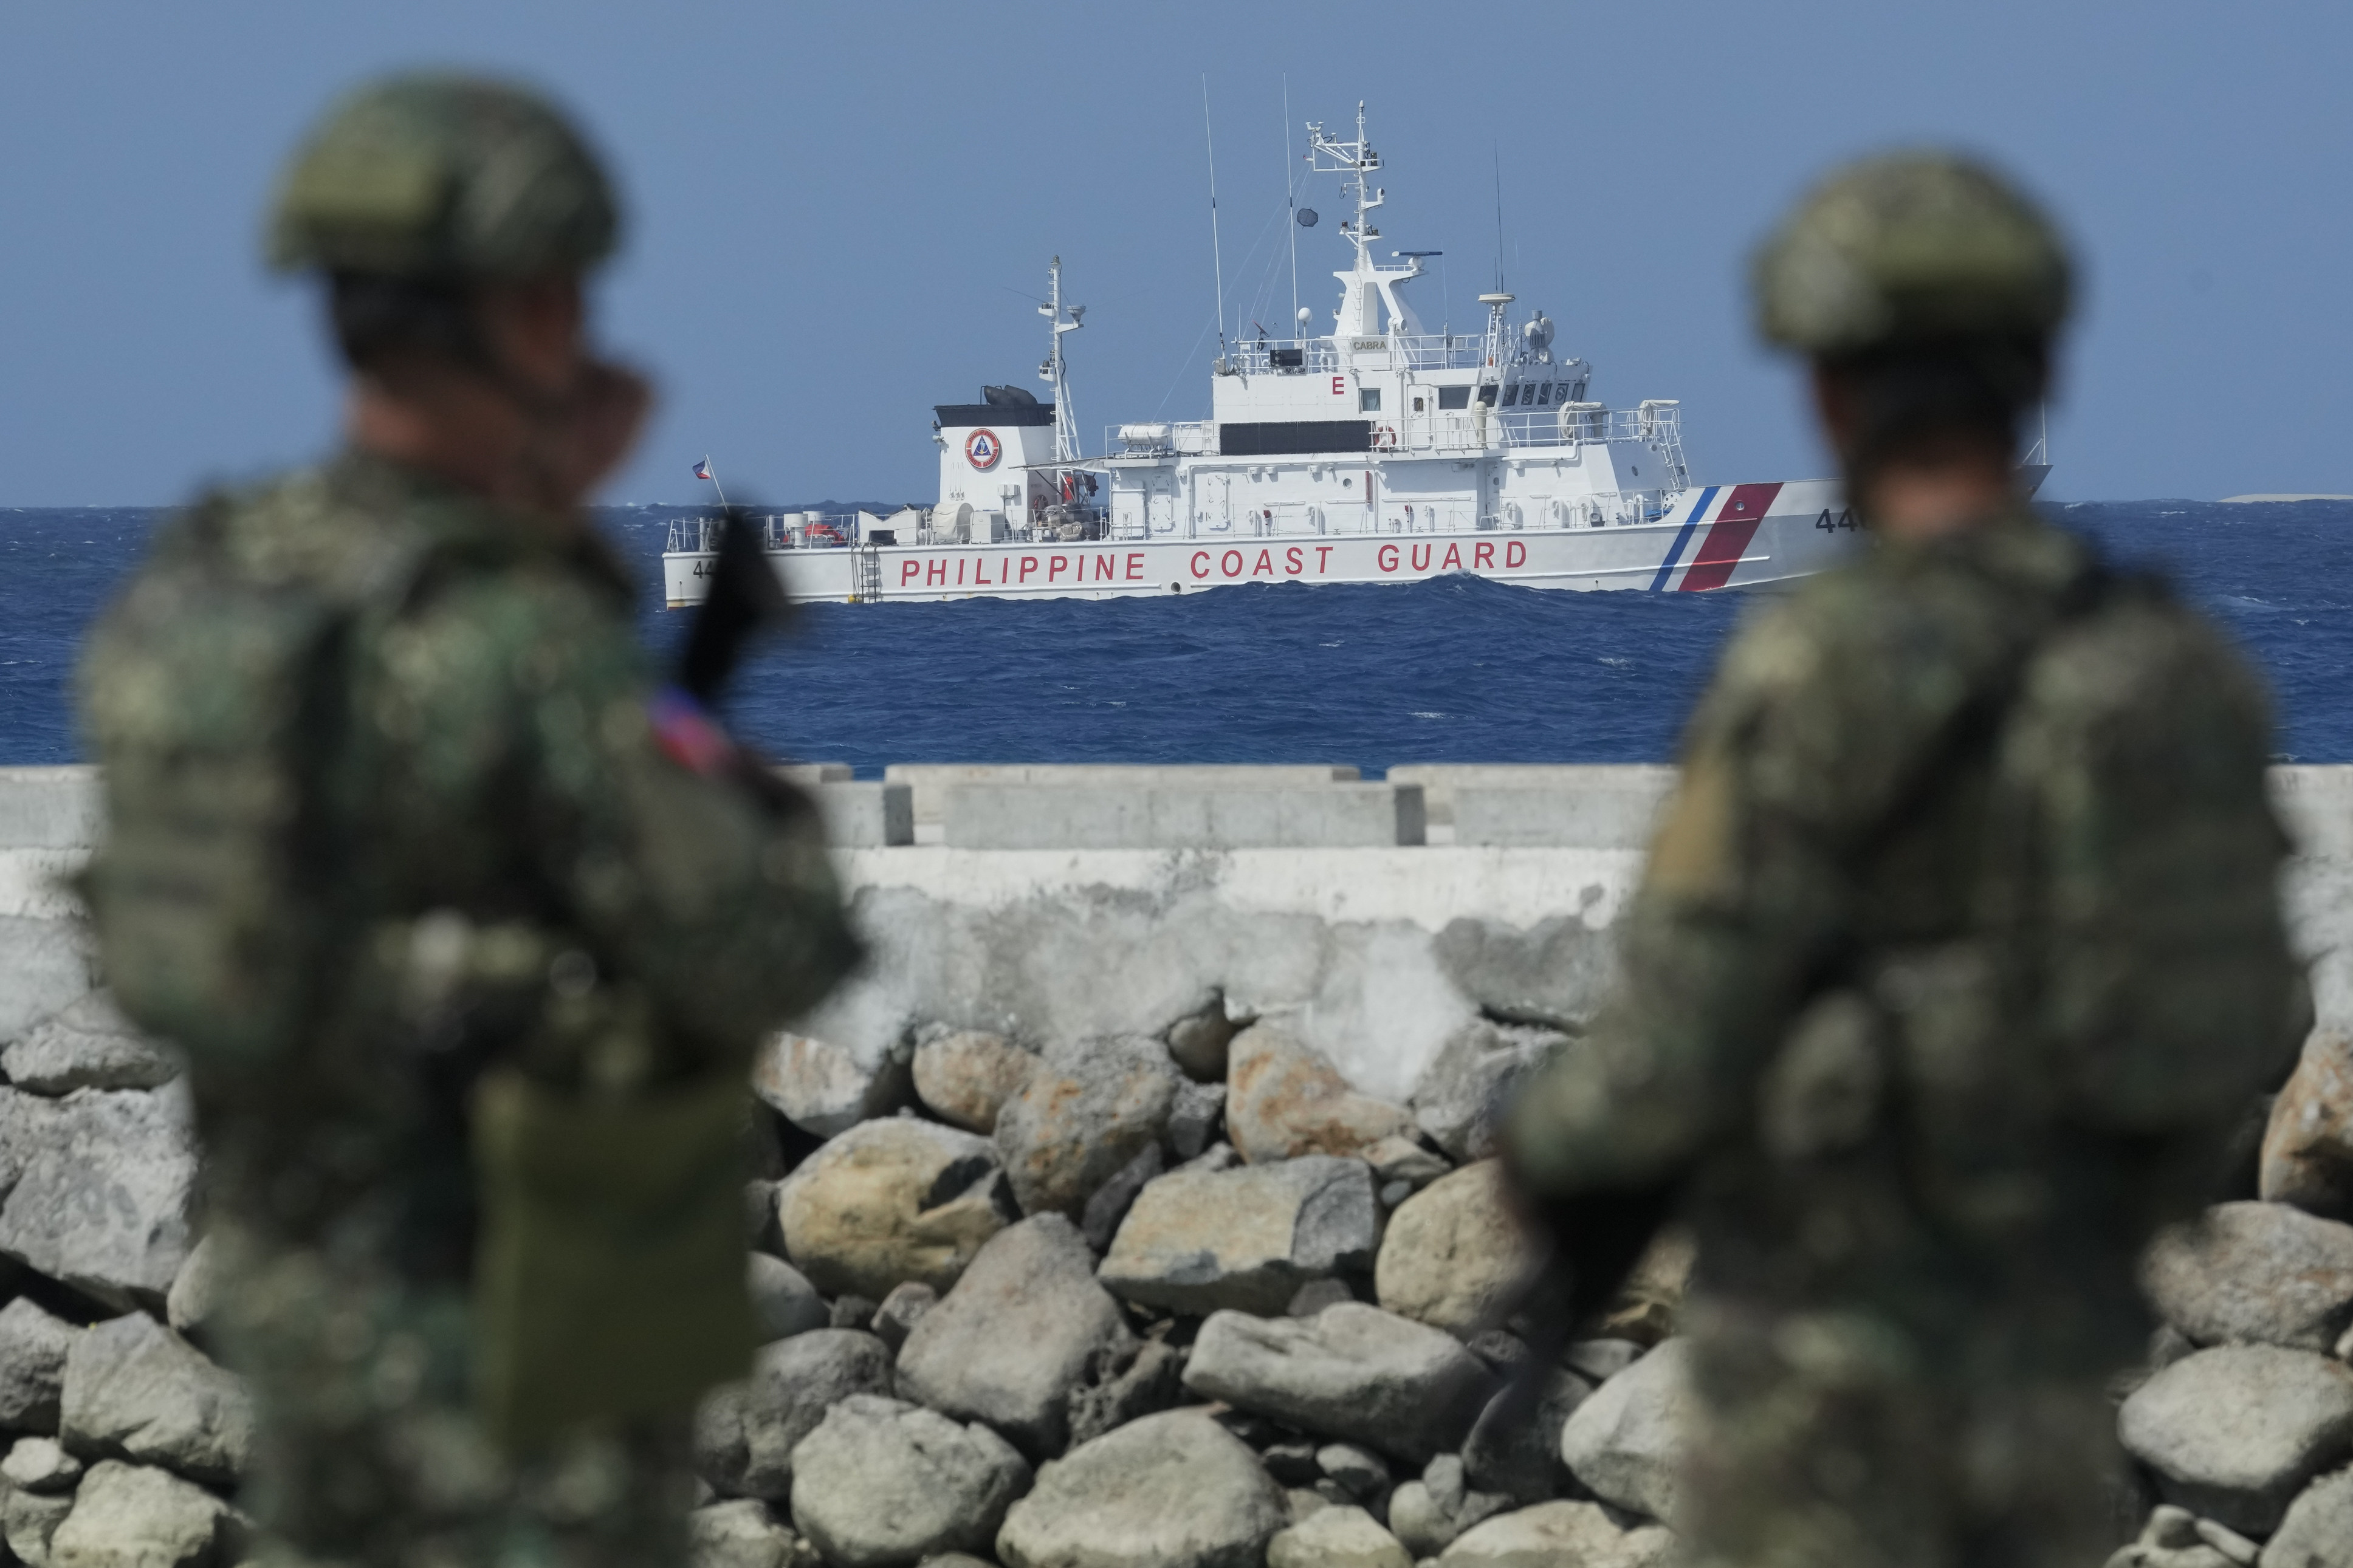 In this week’s issue of the Global Impact newsletter, we attempt to keep up with the ever-evolving tensions in the South China Sea following a busy time in the disputed waterway. Photo: AP